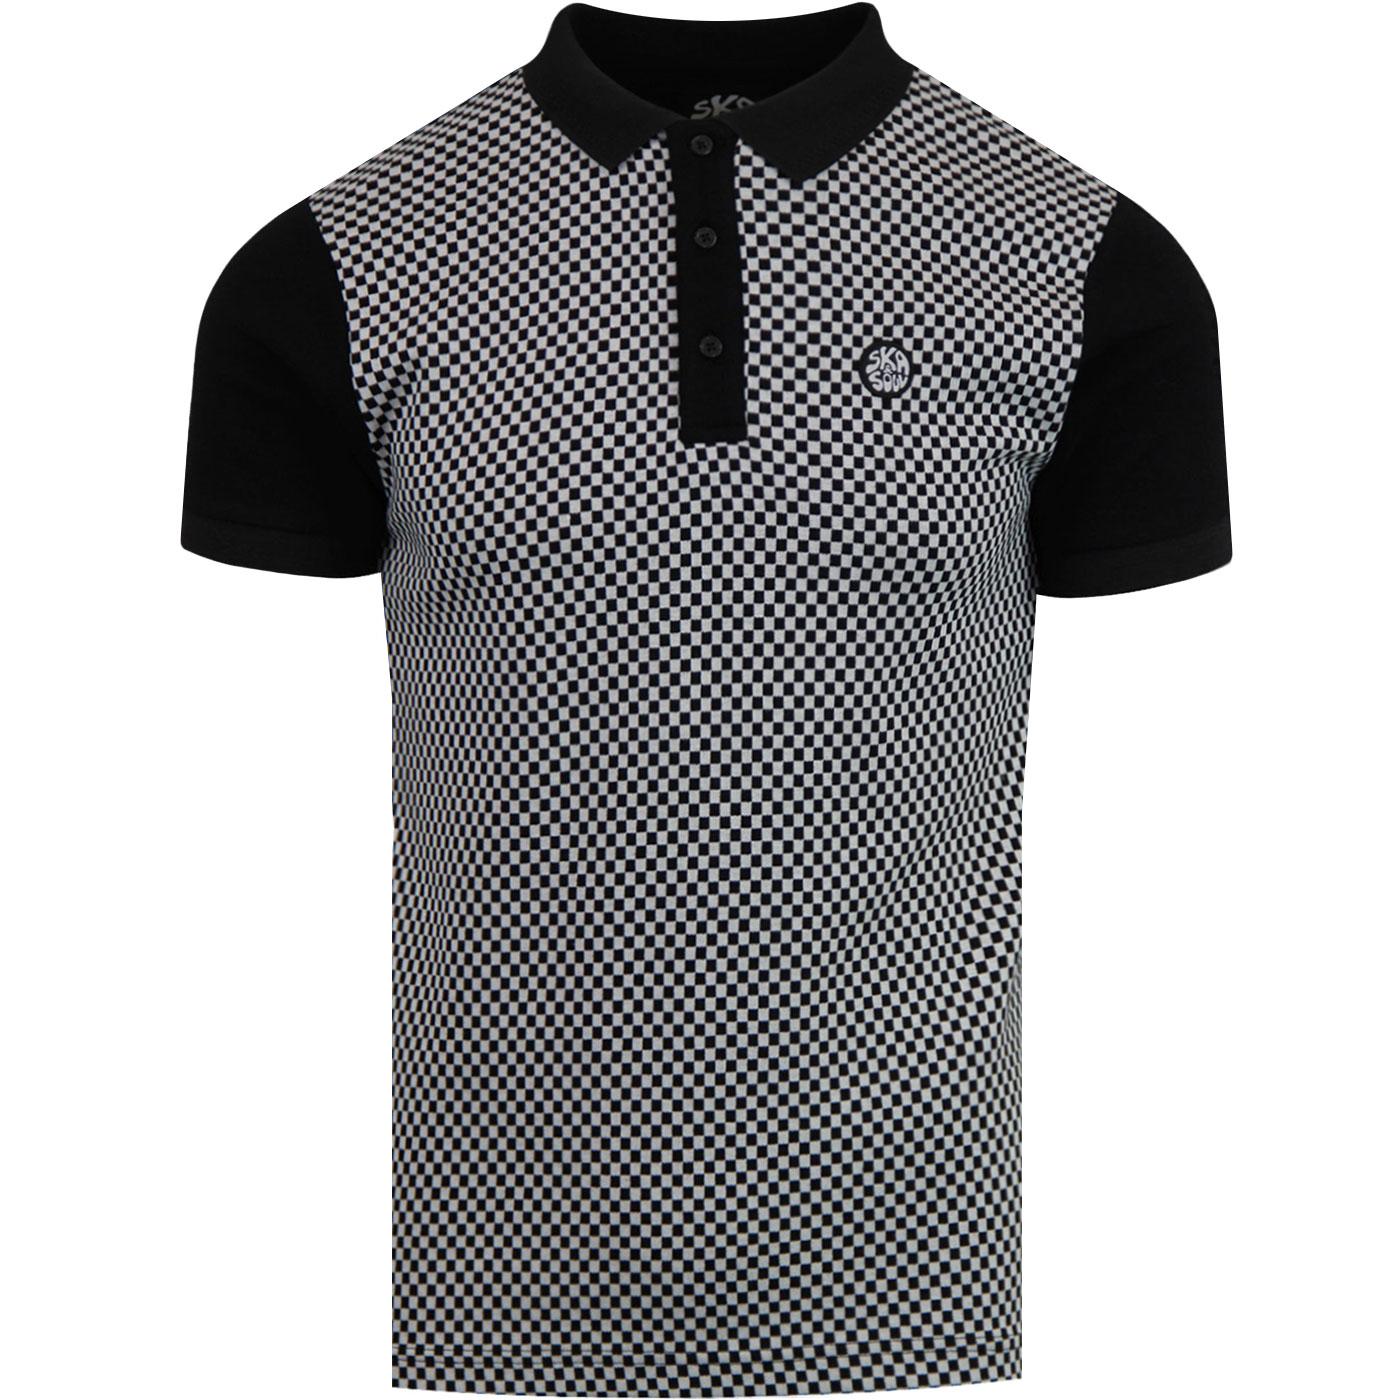 Fred Perry woven panel polo shirt in brighton blue